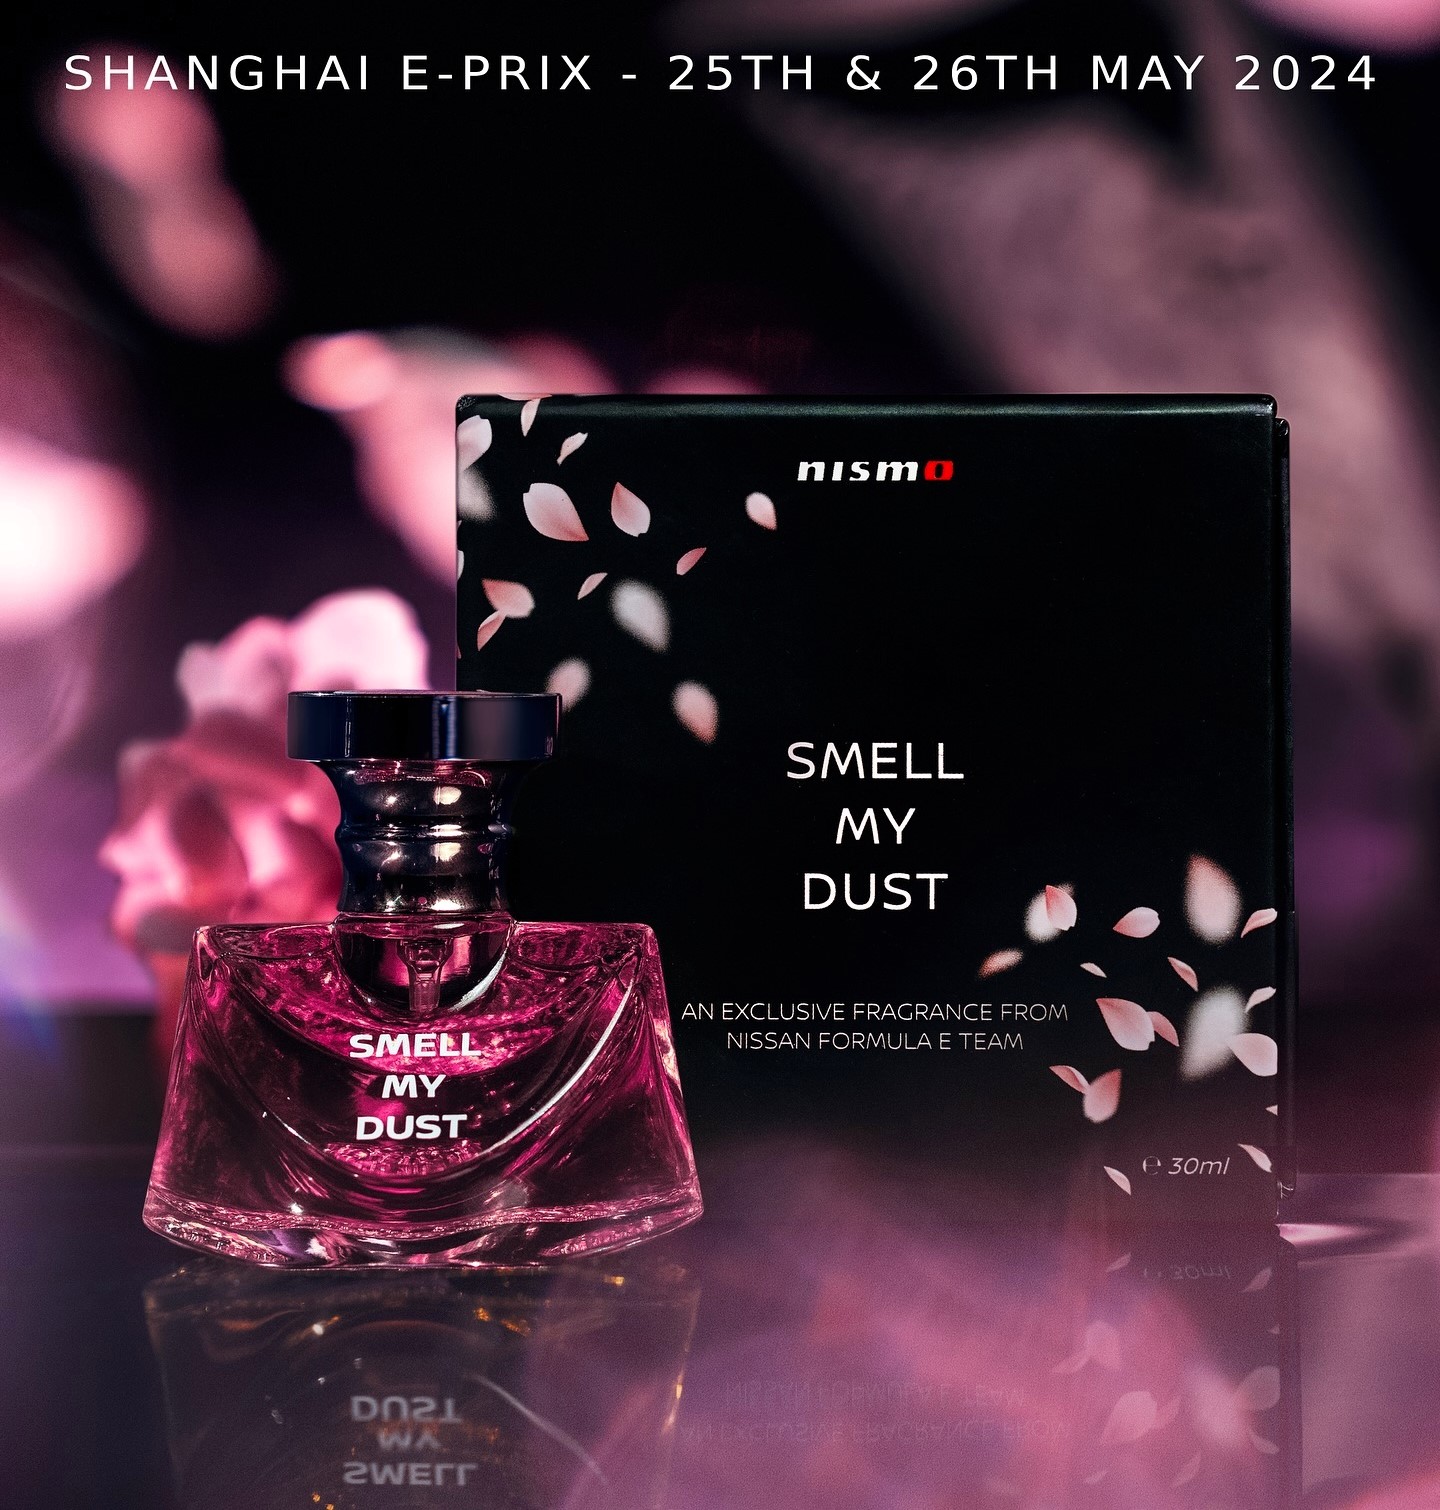 Nissan teases a new perfume, "smell my tyres," combining scents of tyre remnants and cherry blossom. Released in a 30ml pink bottle, it debuts at the Shanghai E-Prix on May 25, leaving fans intrigued.